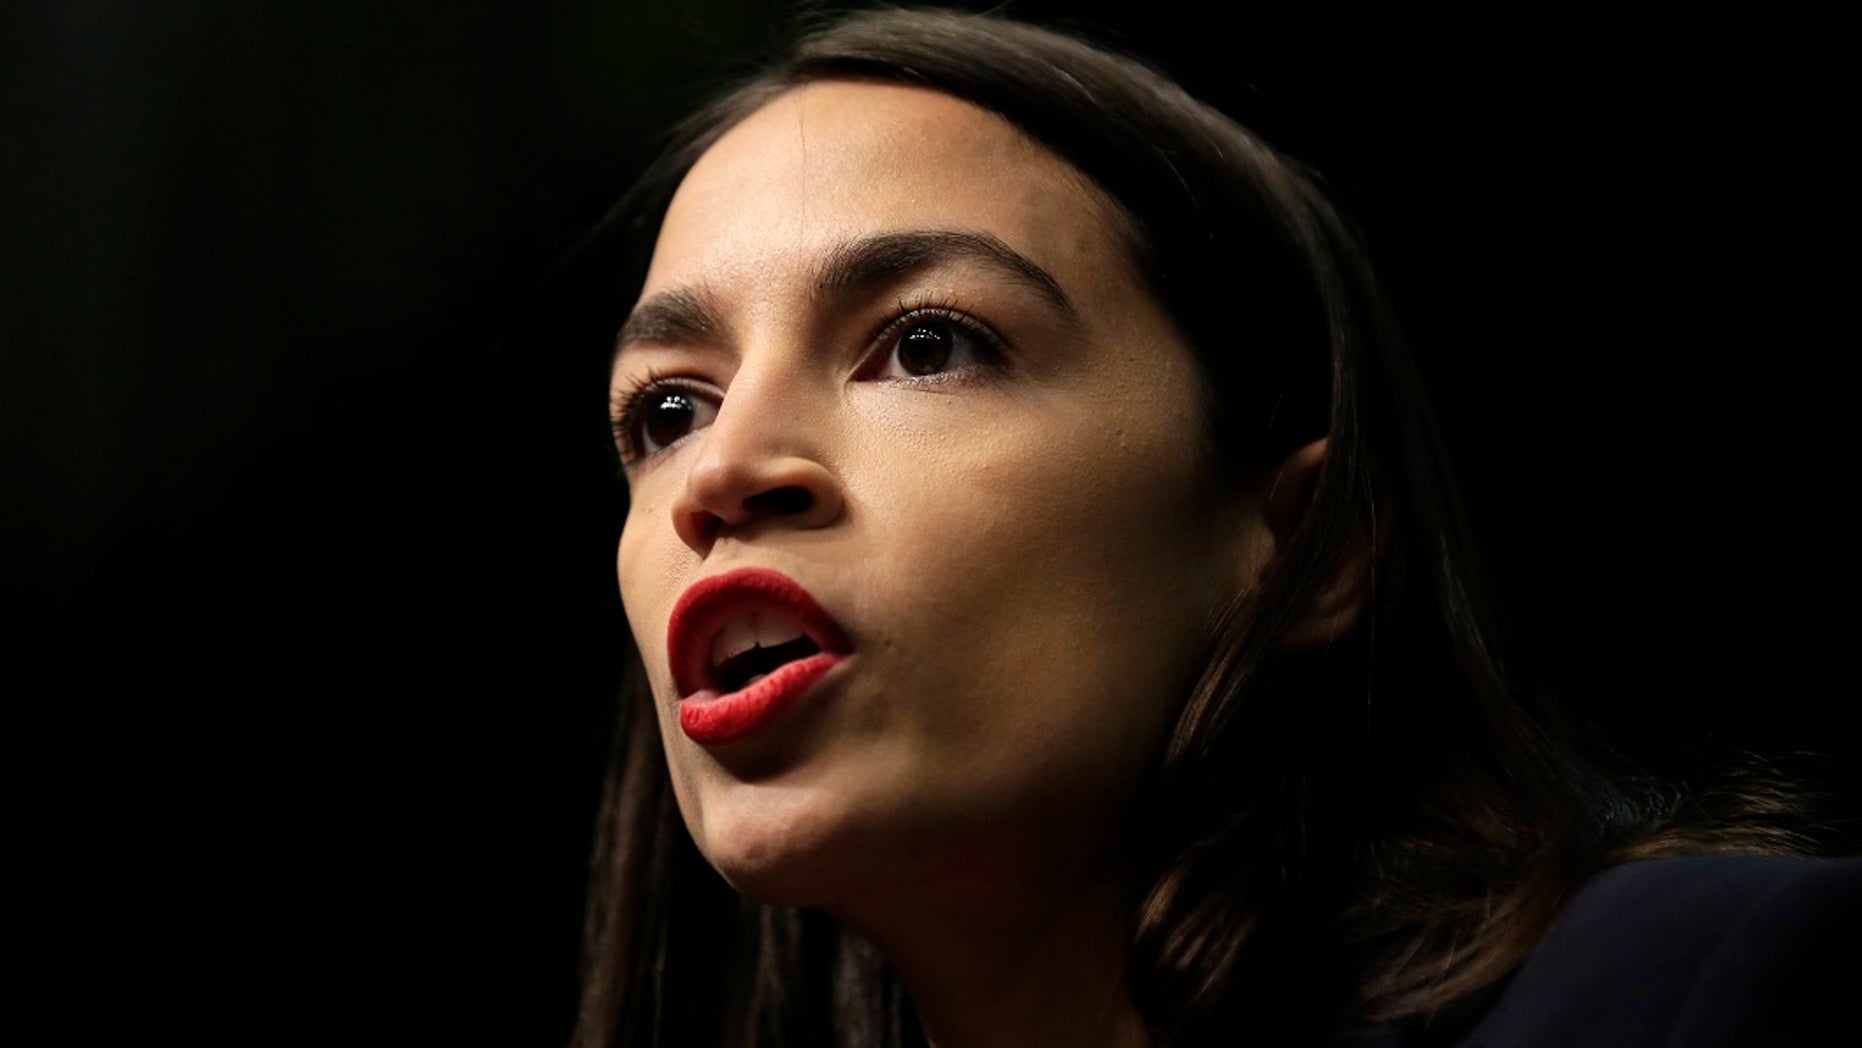 Rep. Alexandria Ocasio-Cortez, D-N.Y., speaks during the National Action Network Convention in New York, Friday, April 5, 2019. (Associated Press)